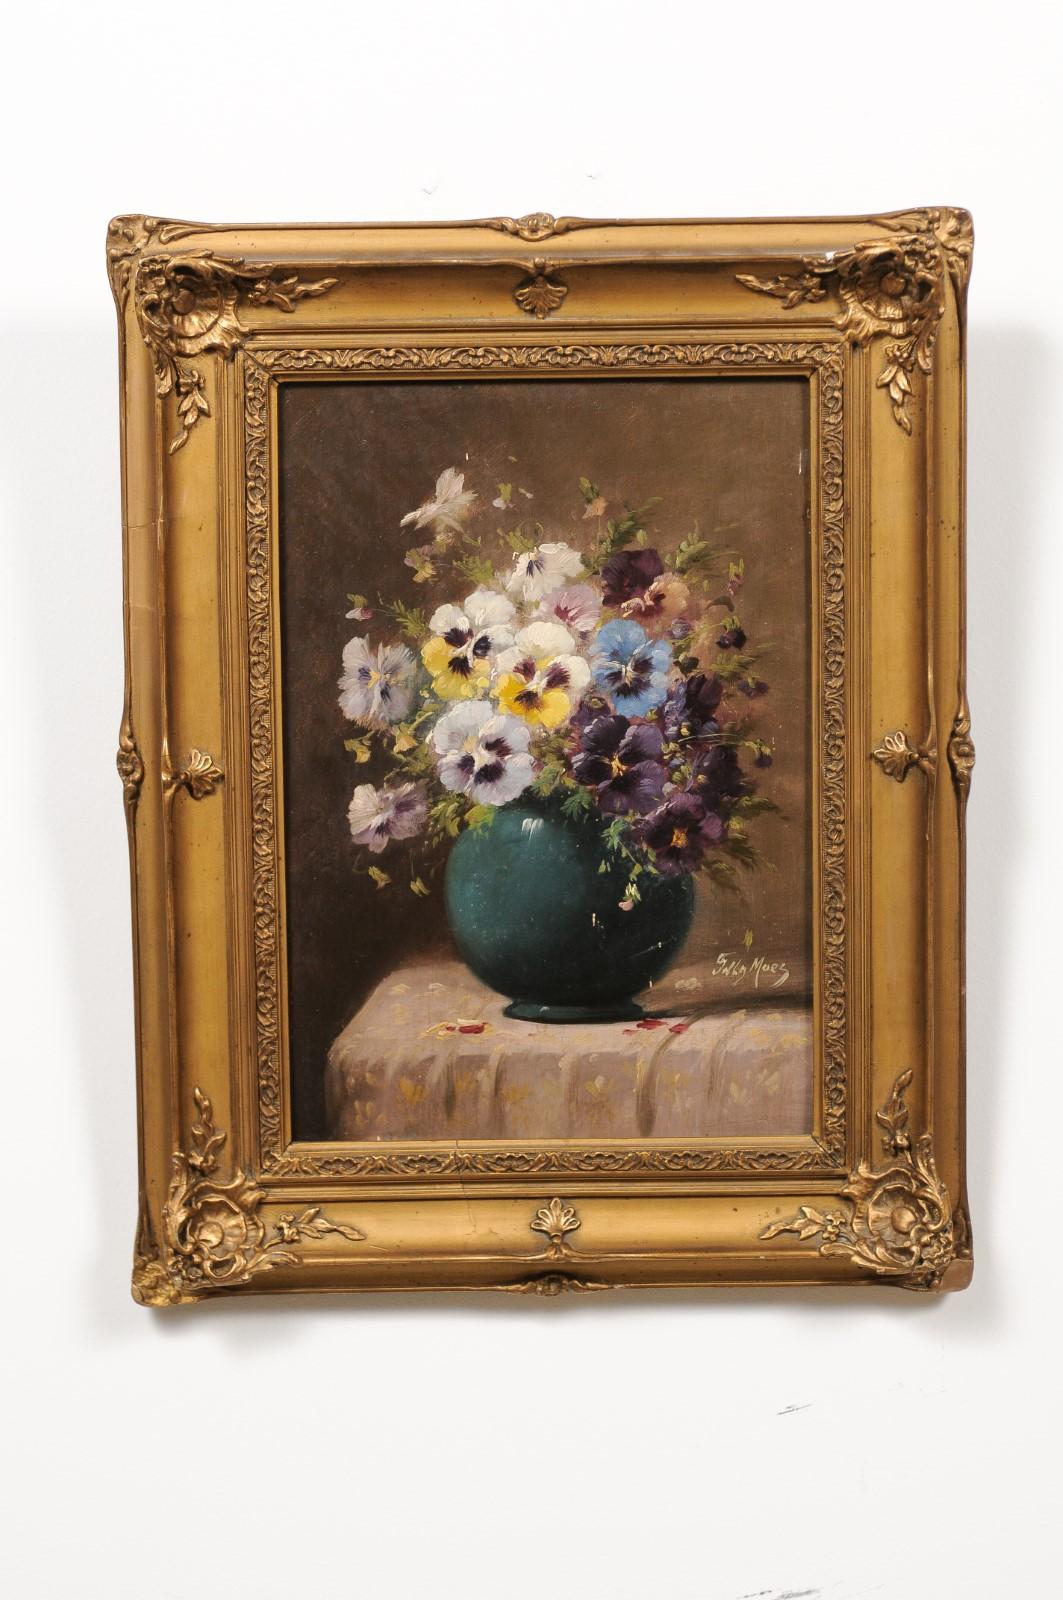 A French framed oil on panel still-life painting from the late 19th century depicting pansies, in giltwood frame. Created in France during the later years of the 19th century, this oil painting depicts a bouquet of pansies displayed in a